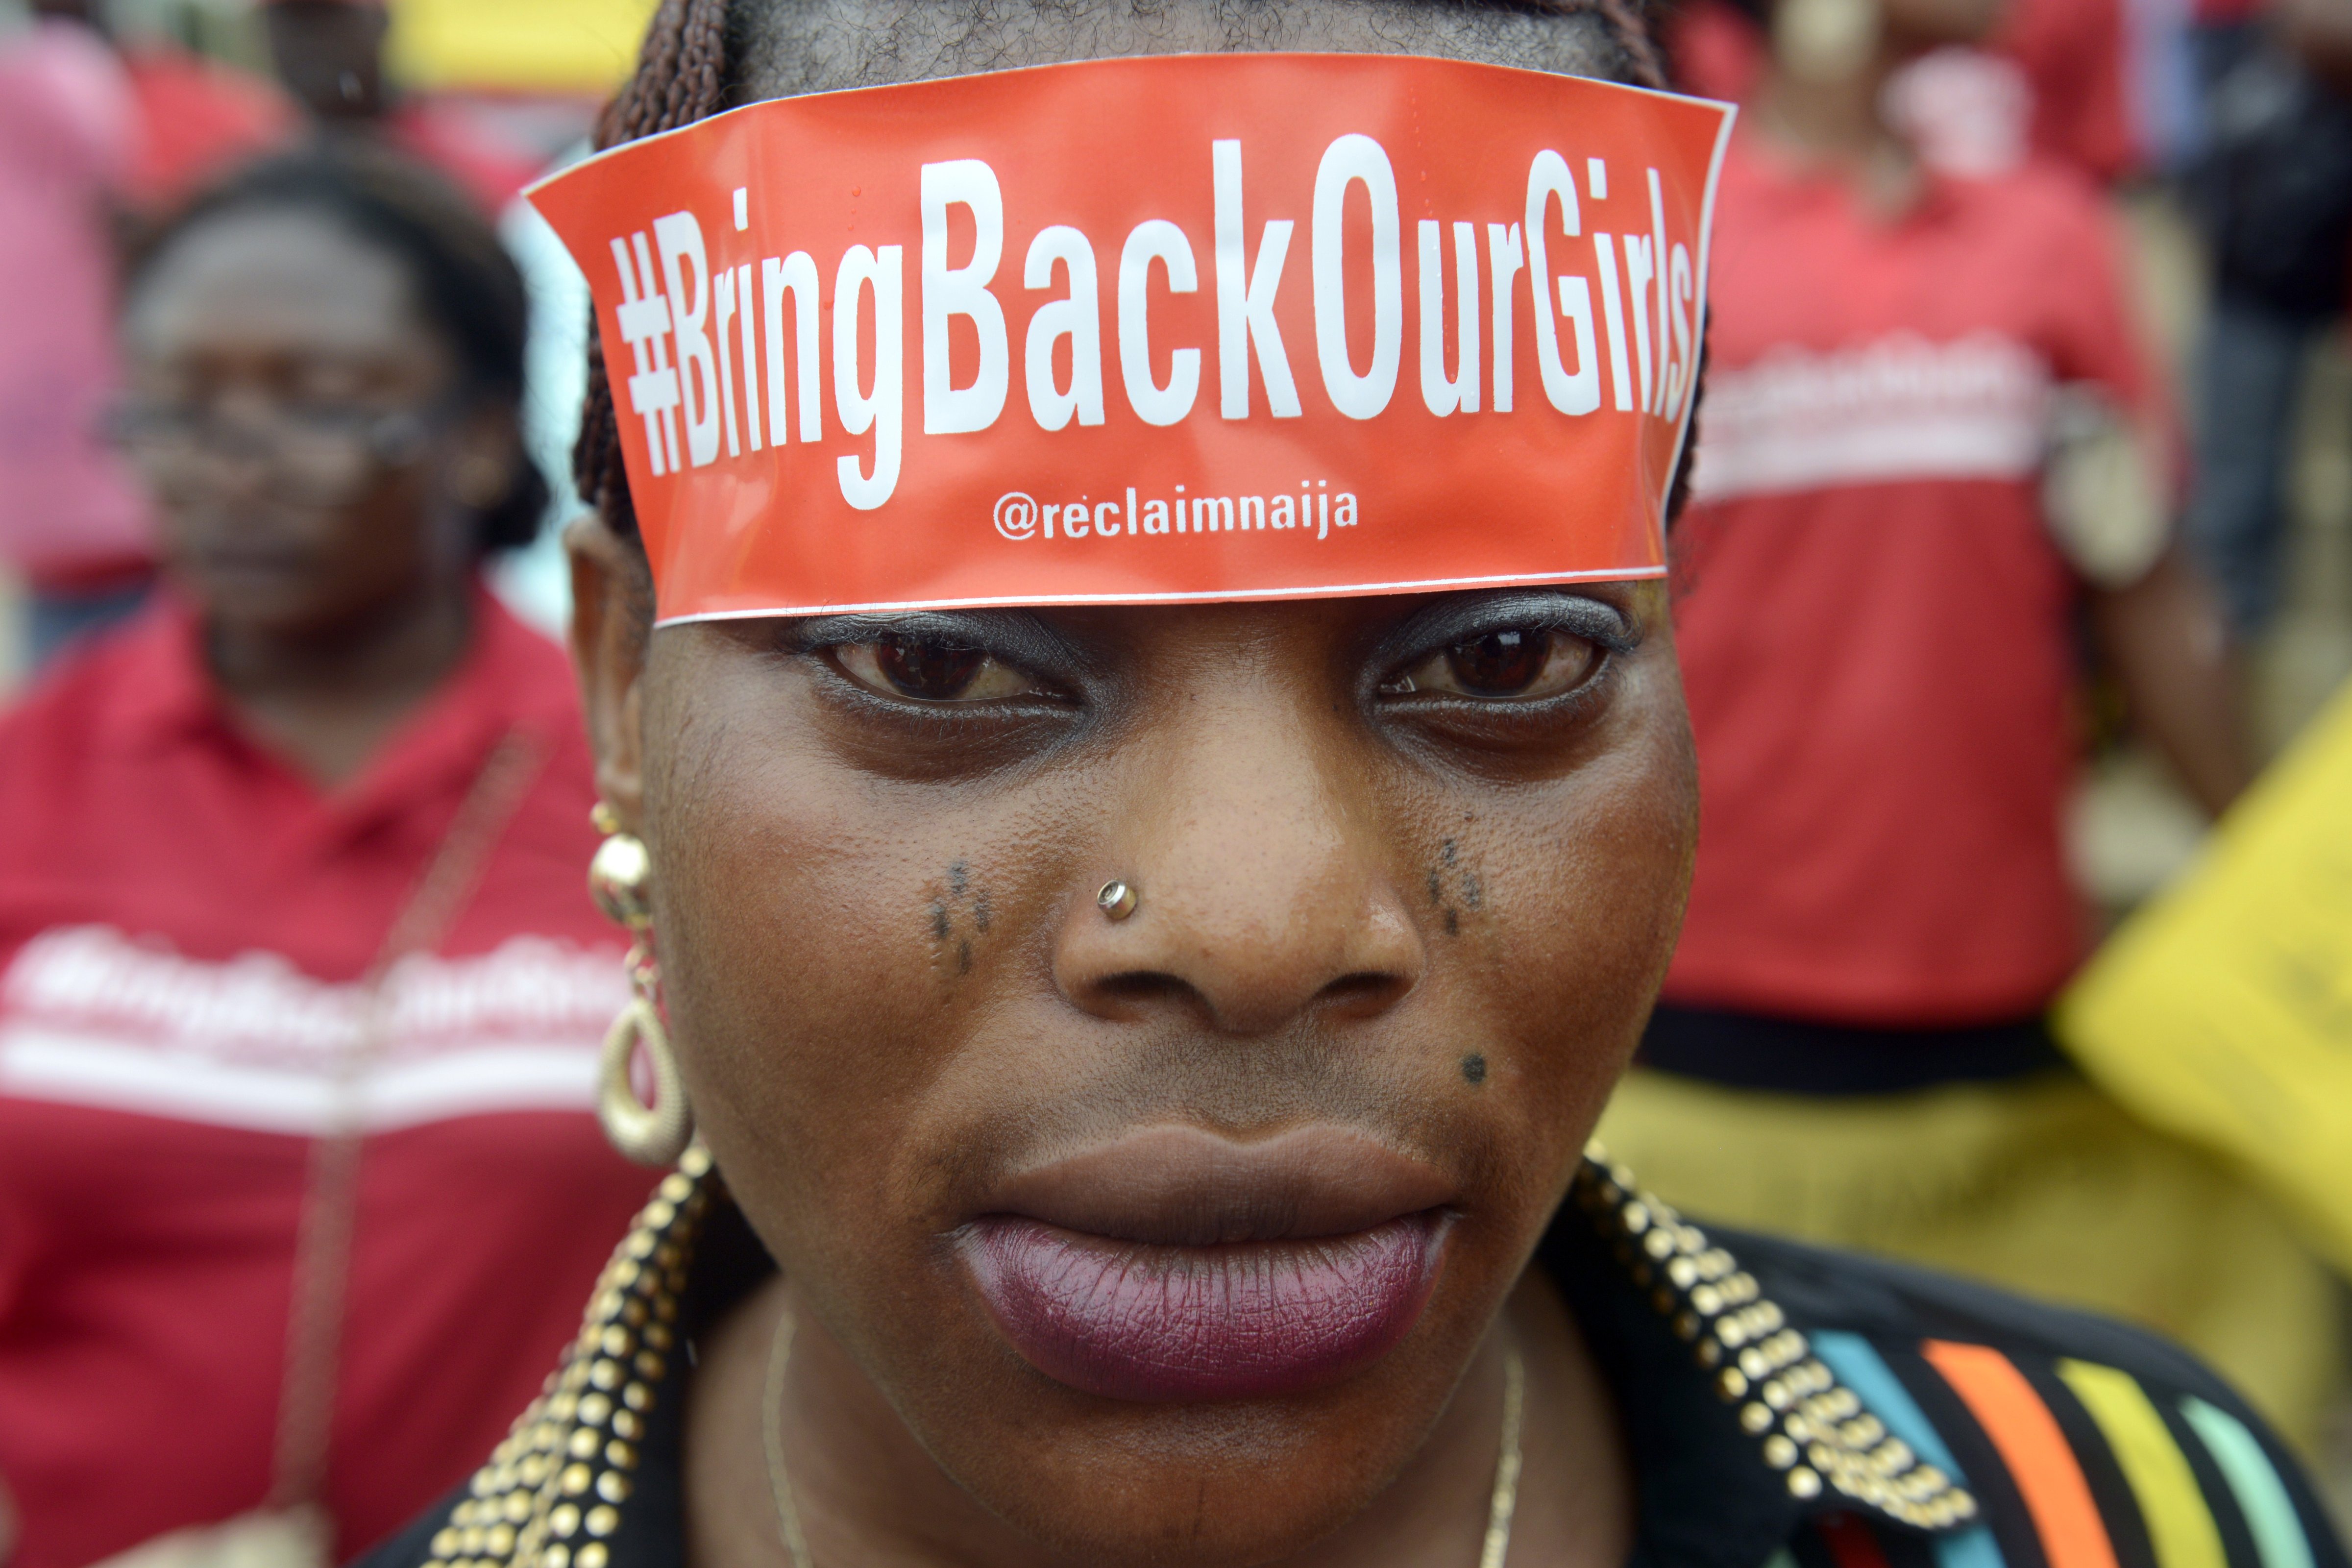 A woman with a sticker on her head bearing the slogan "Bring back our girls" marches for the release of the more than 200 abducted Chibok school girls in Lagos, Nigeria on May 29, 2014. (Pius Utomi Ekpei—AFP/Getty Images)